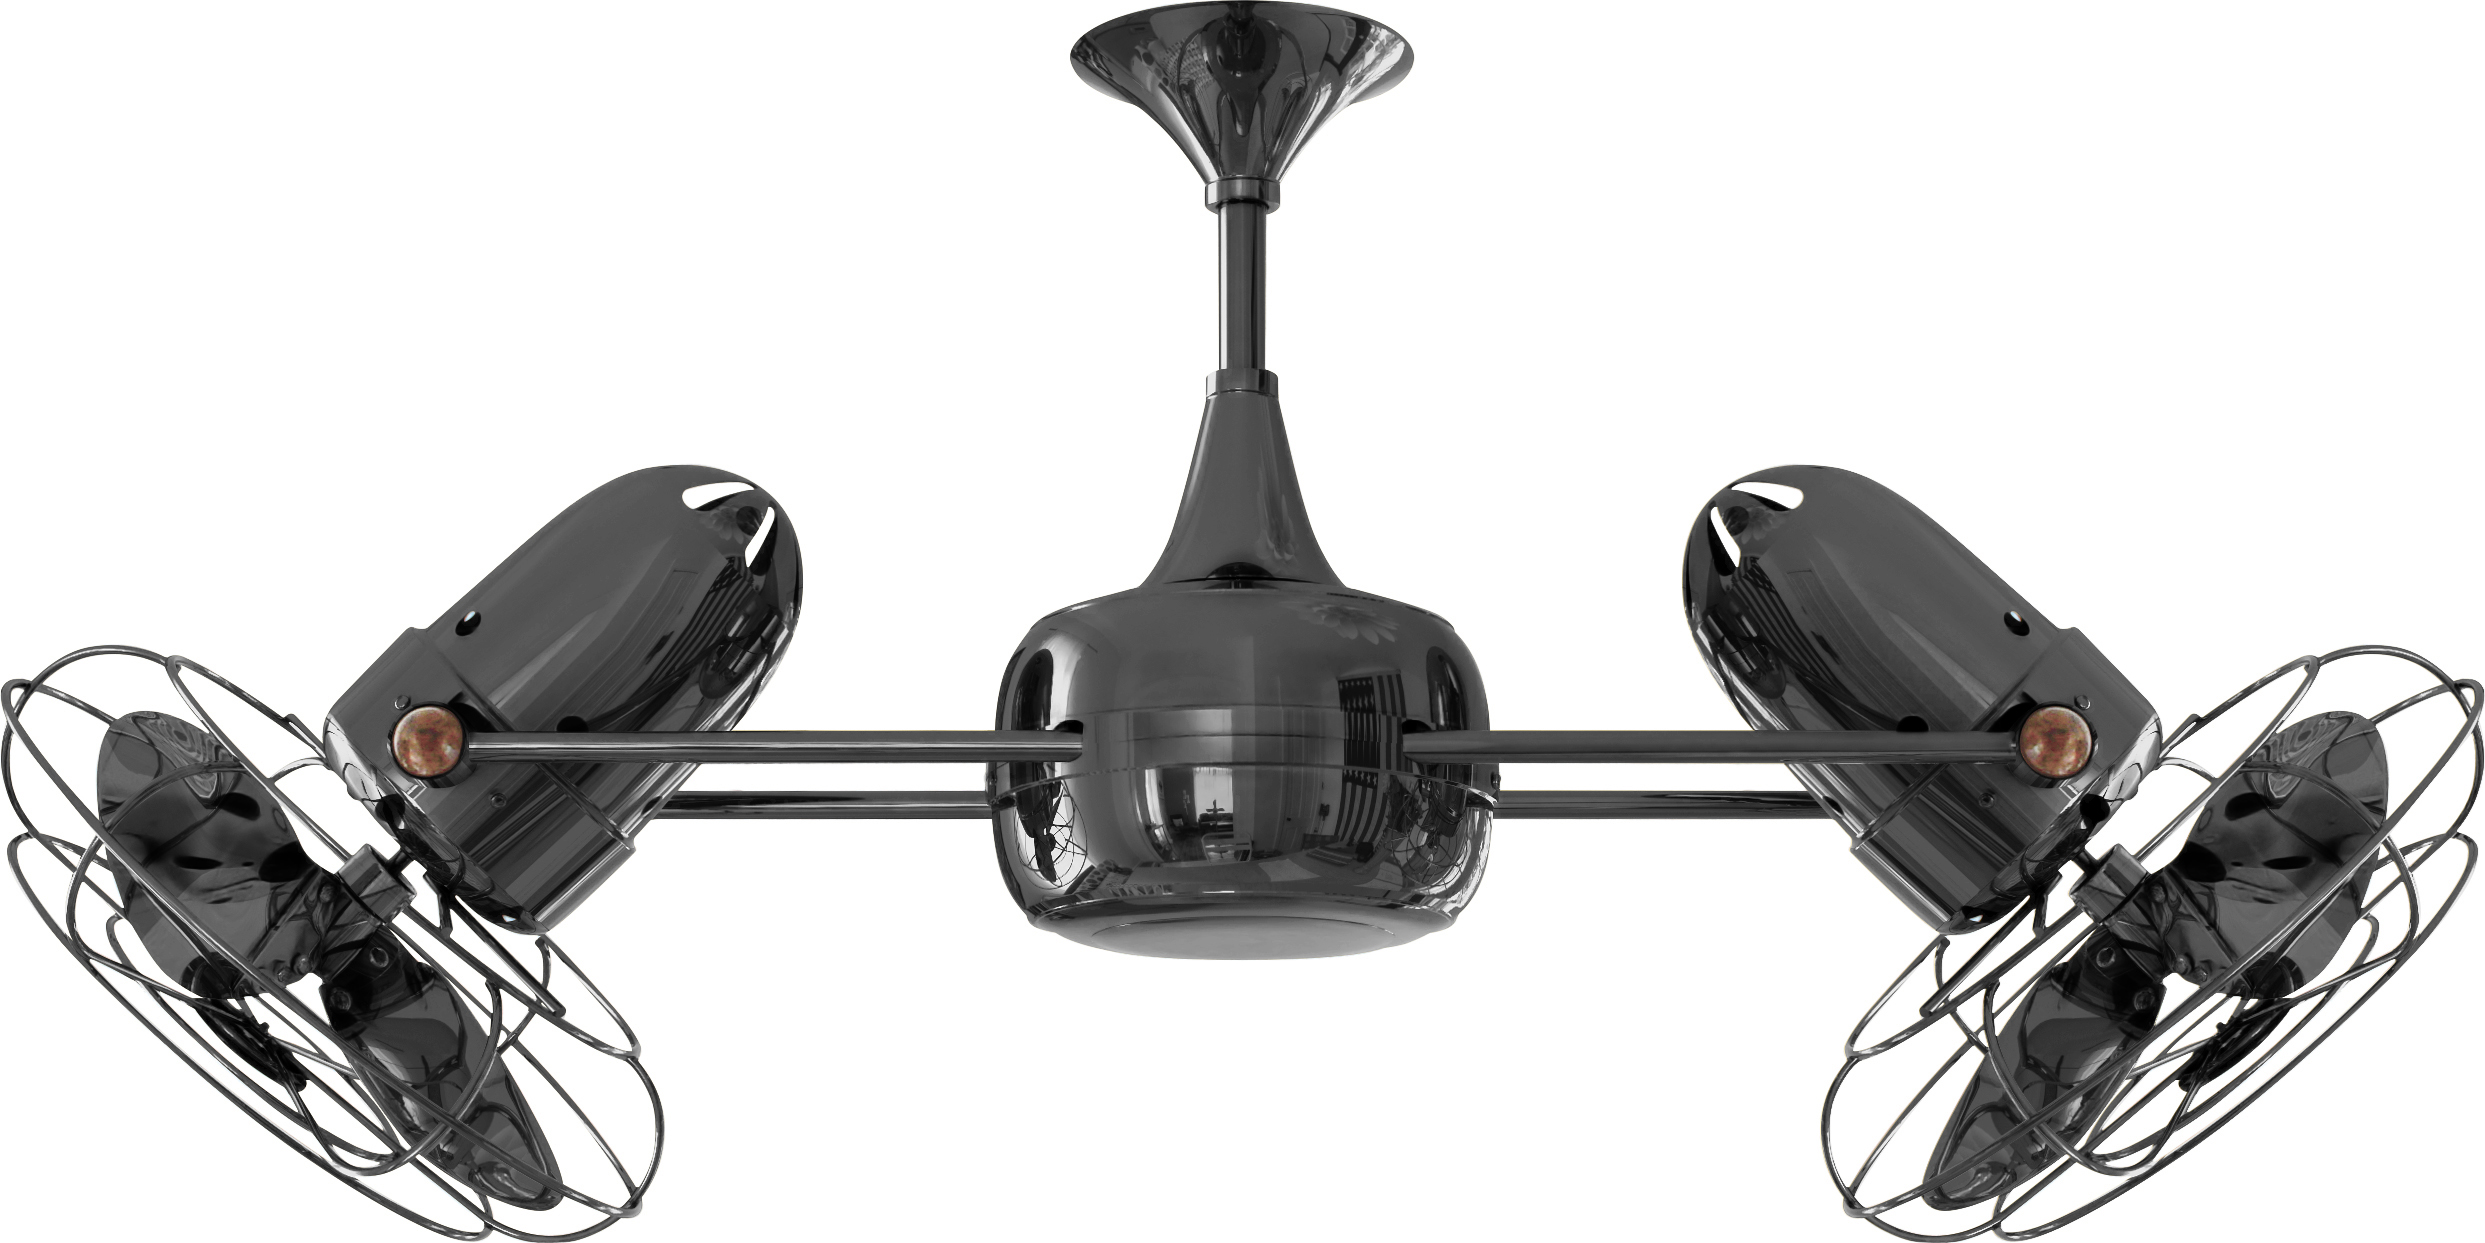 Duplo Dinamico rotational dual head ceiling fan in black nickel finish with Metal blades made by Matthews Fan Company.